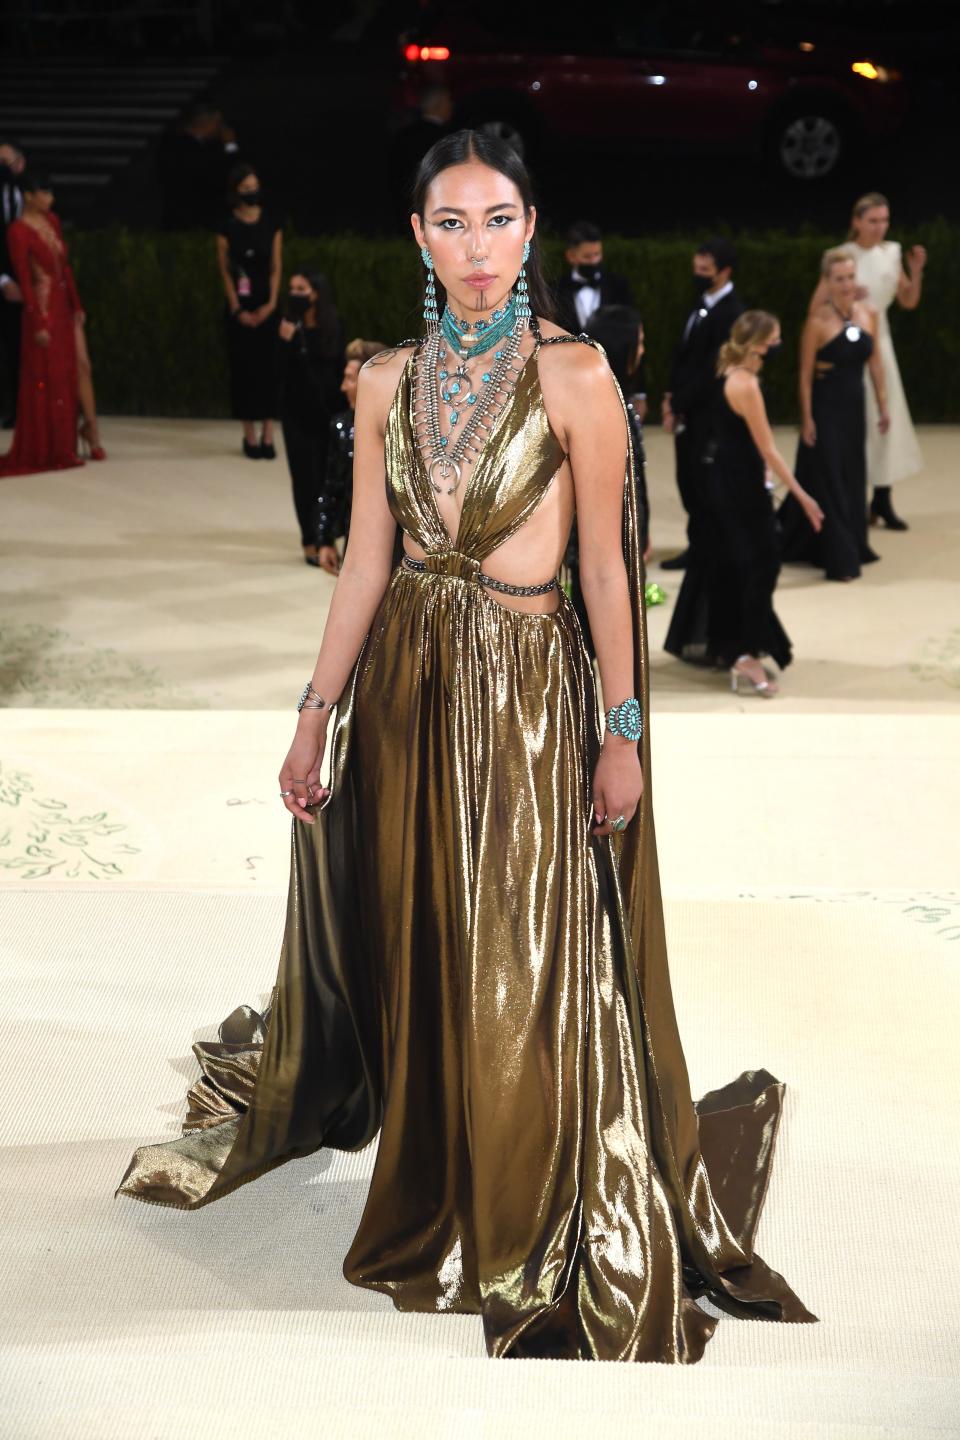 Quannah Chasinghorse attends The 2021 Met Gala Celebrating In America: A Lexicon Of Fashion at Metropolitan Museum of Art on September 13, 2021 in New York City.